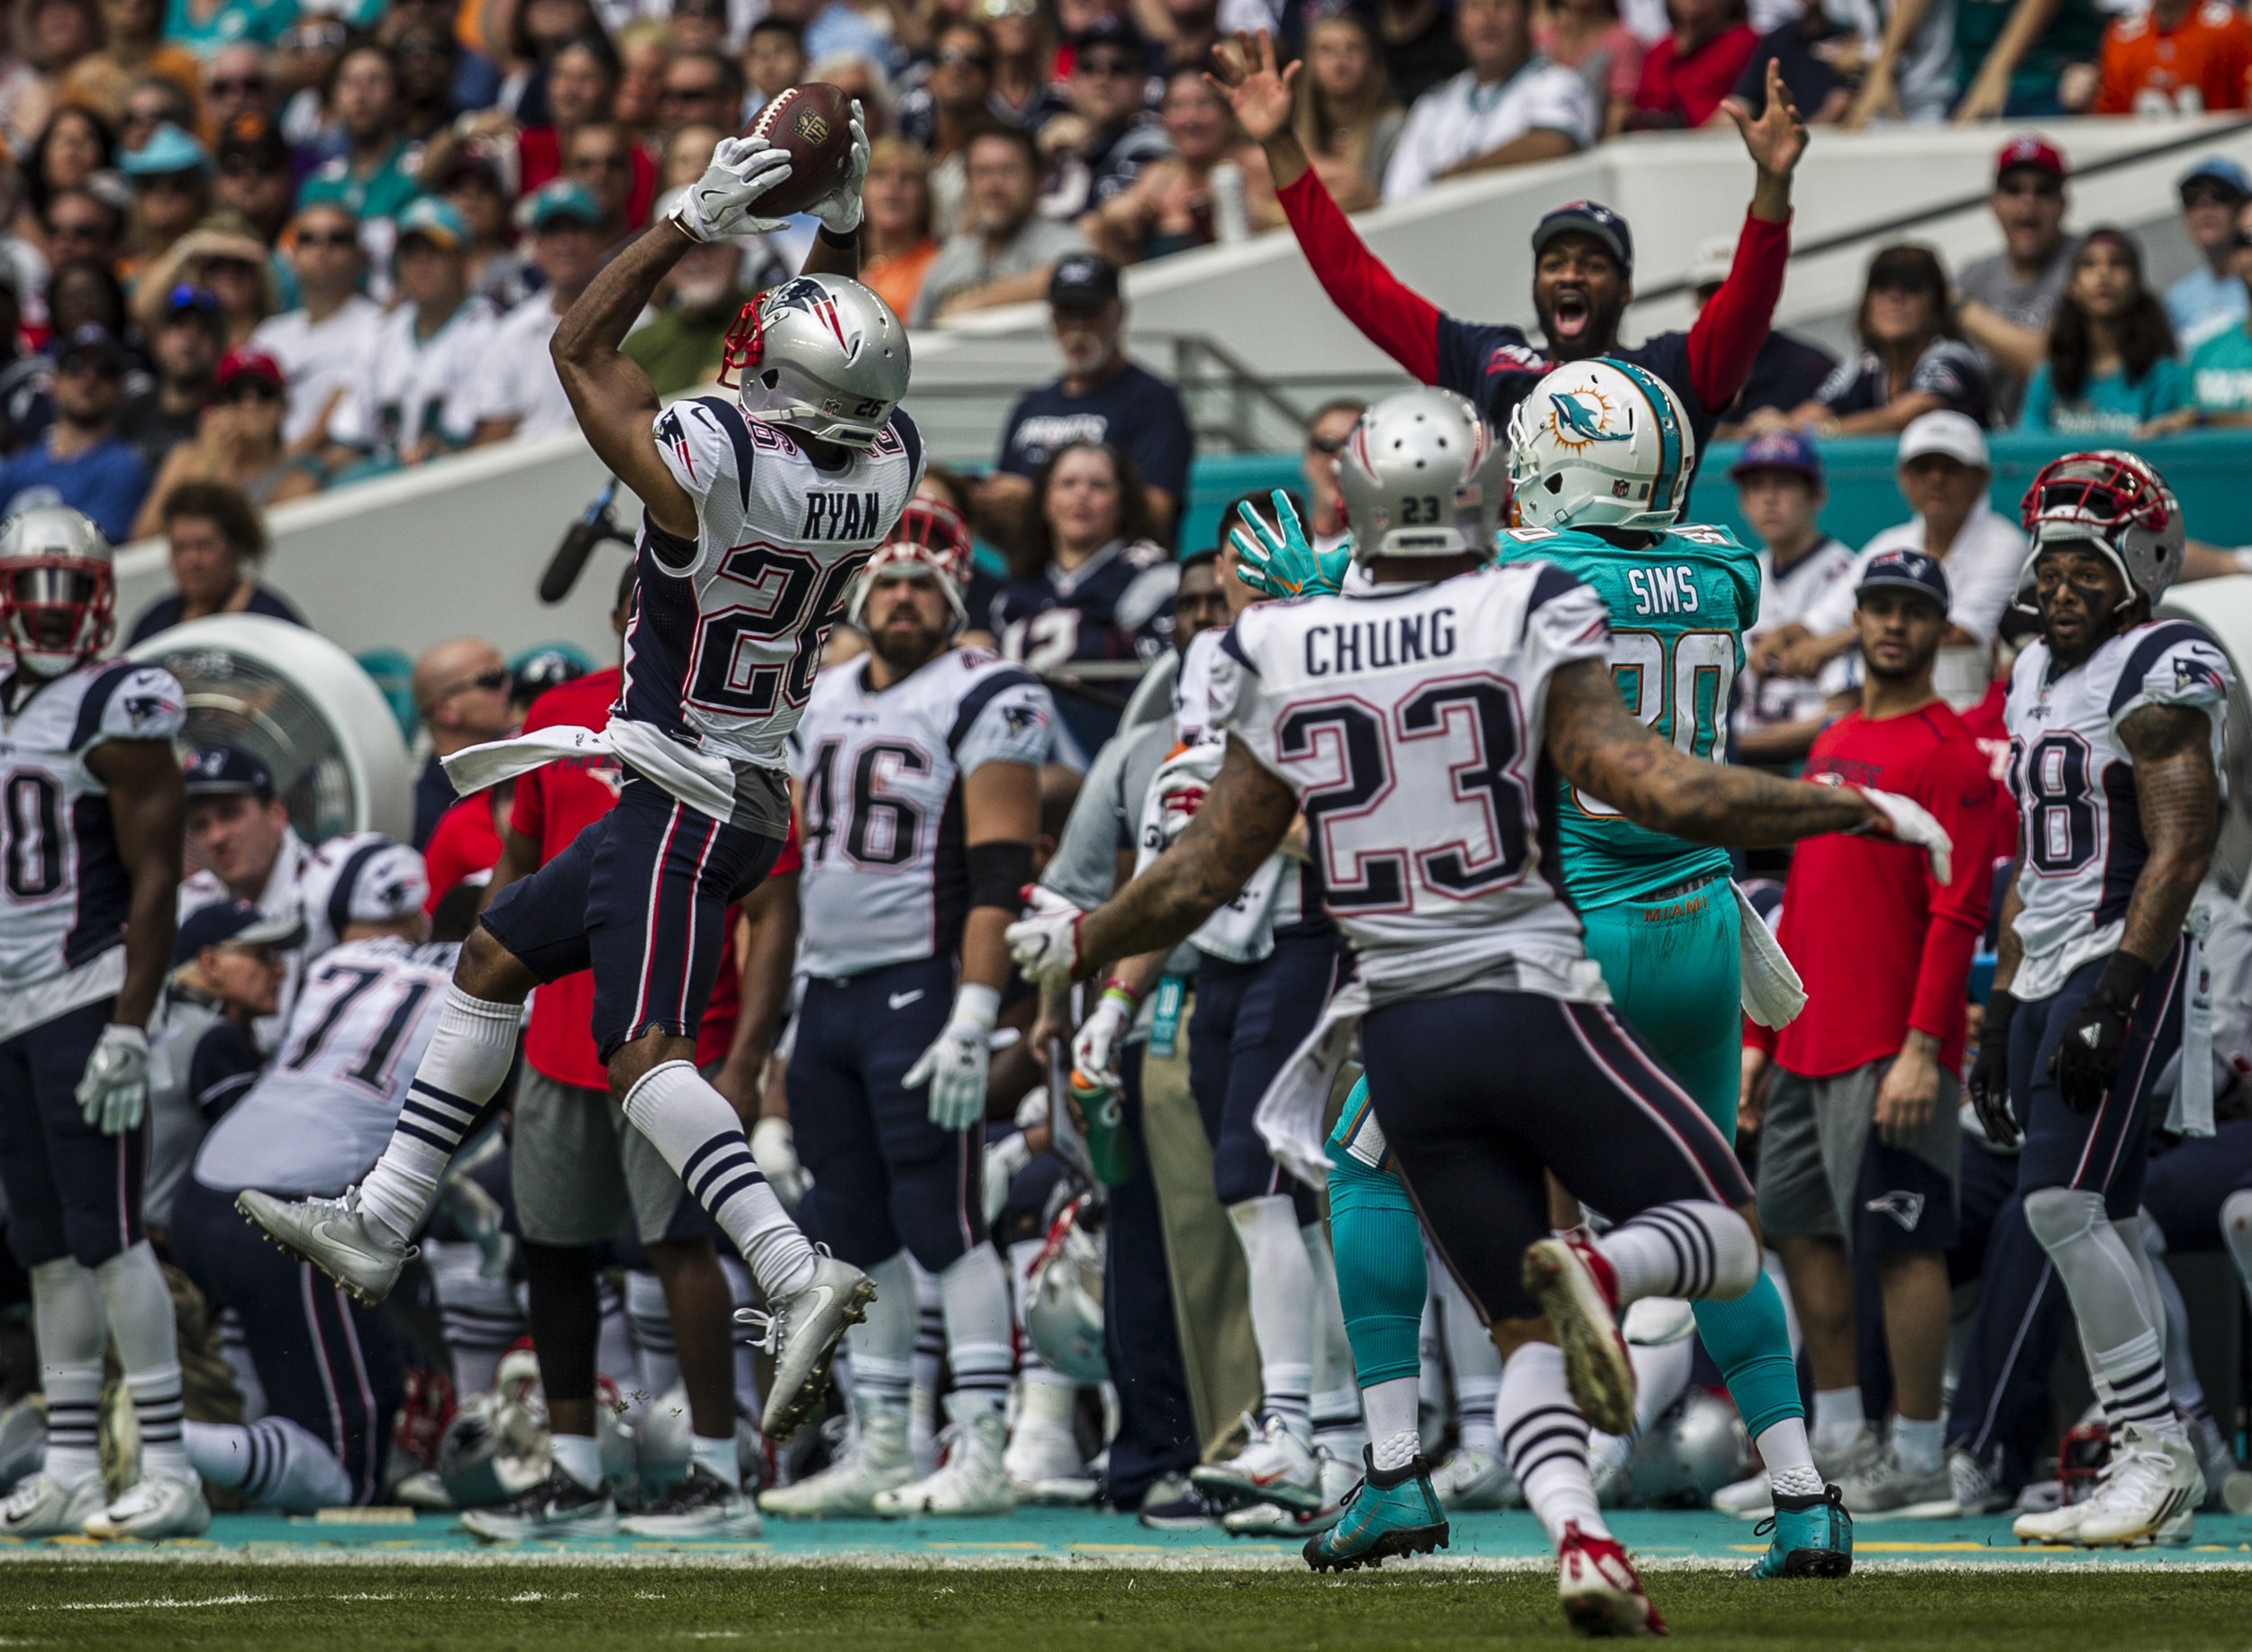  New England Patriots cornerback Logan Ryan (26) intercepts a pass intended for Miami Dolphins tight end Dion Sims (80) as the Patriots sideline celebrates at Hard Rock Stadium in Miami Gardens, Florida, January 1, 2017. 